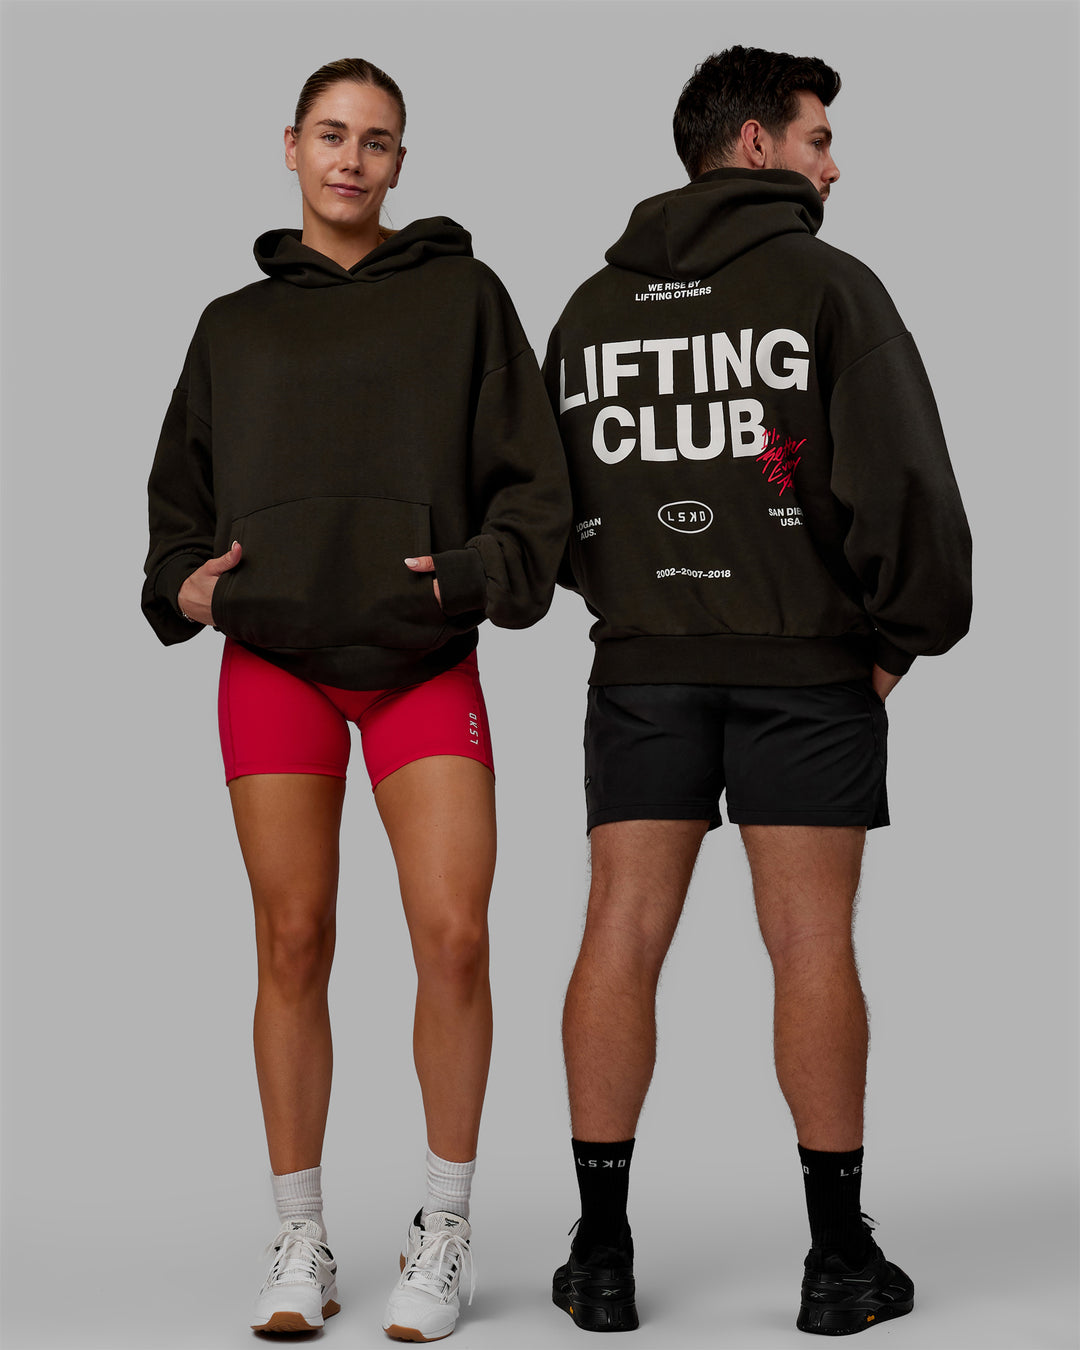 Duo wearing Unisex Lifting Club Hoodie Oversize - Pirate Black-Off White